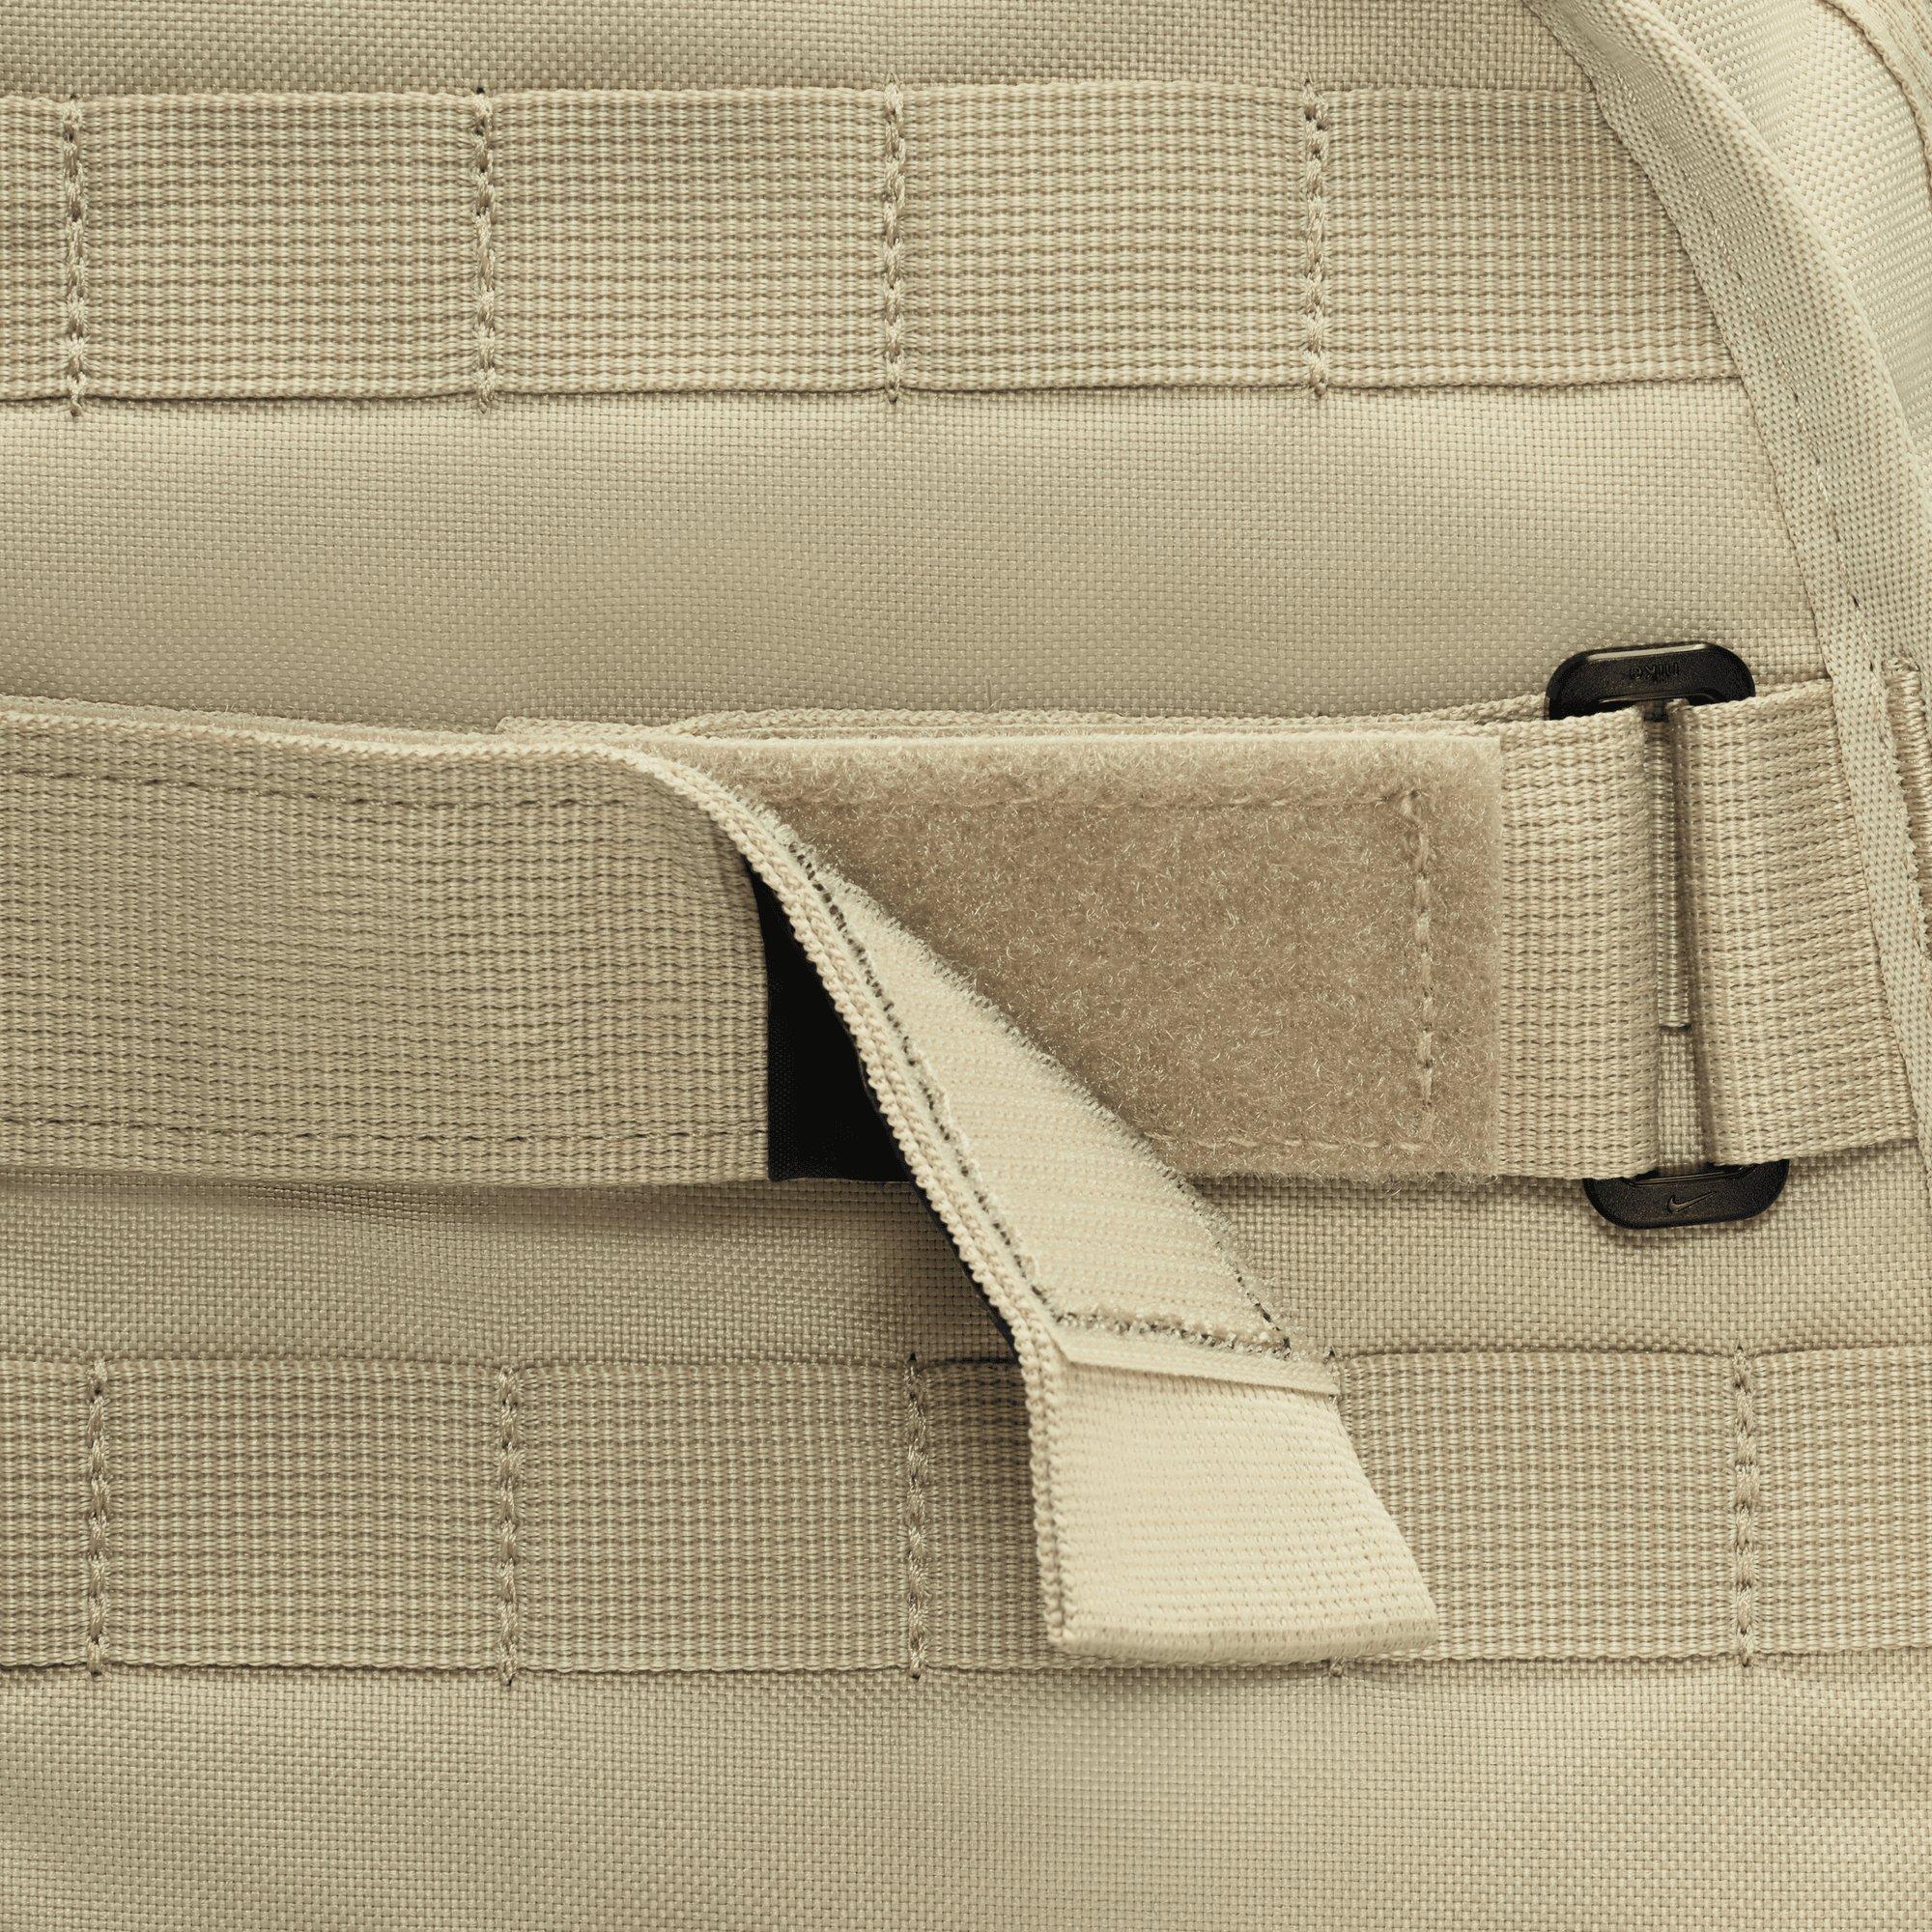 Nike why RPM Backpack - Limestone / Black / Anthracite - the off